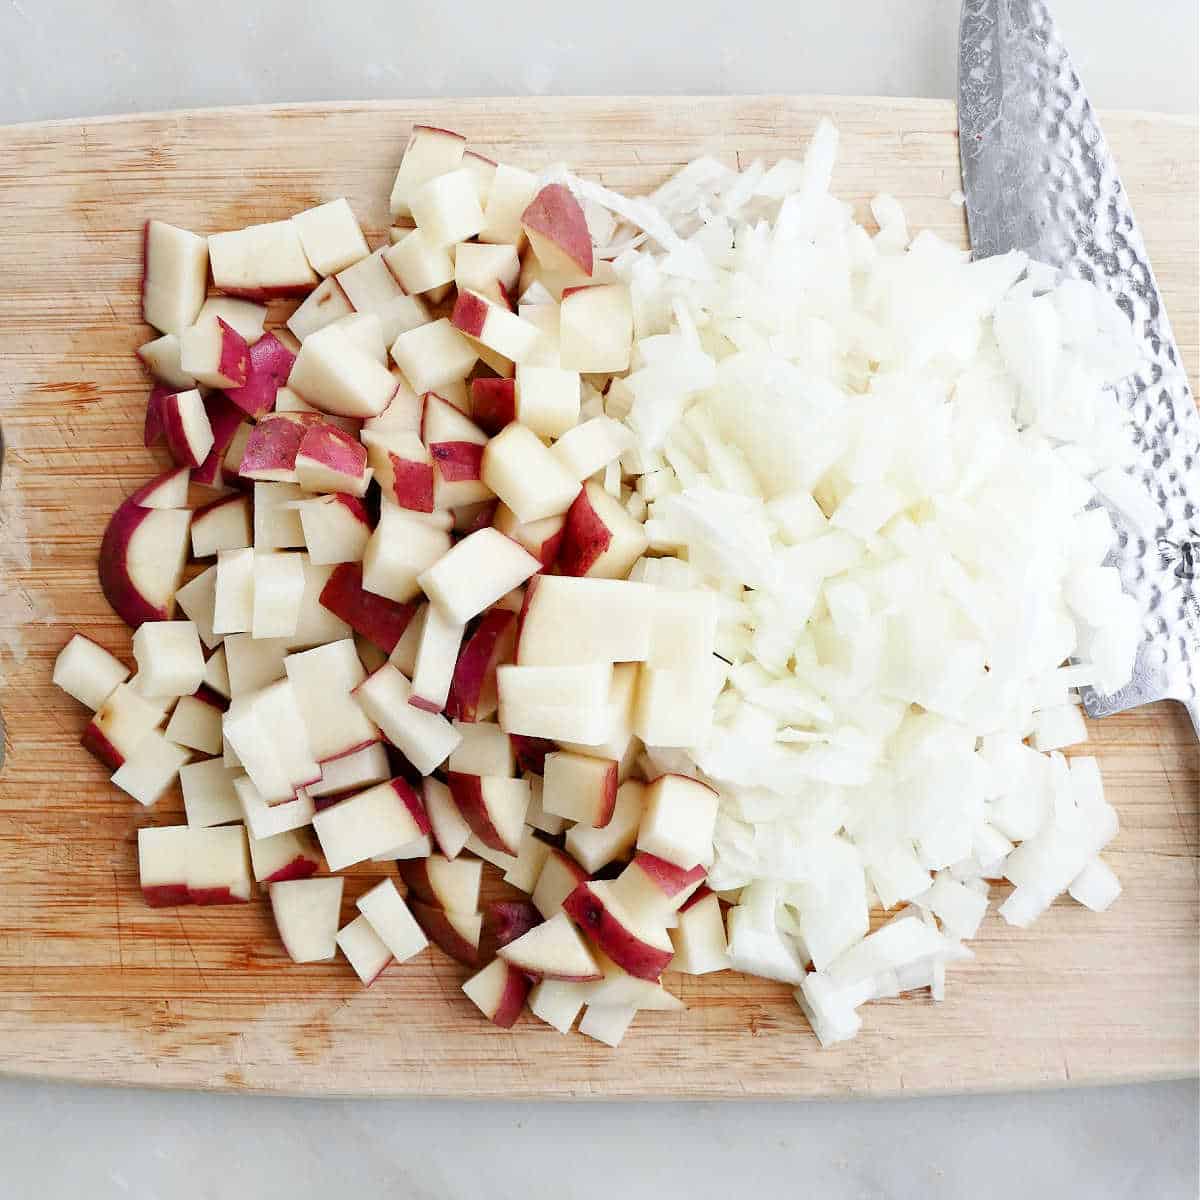 diced onion and cubed red potato on a cutting board with a knife